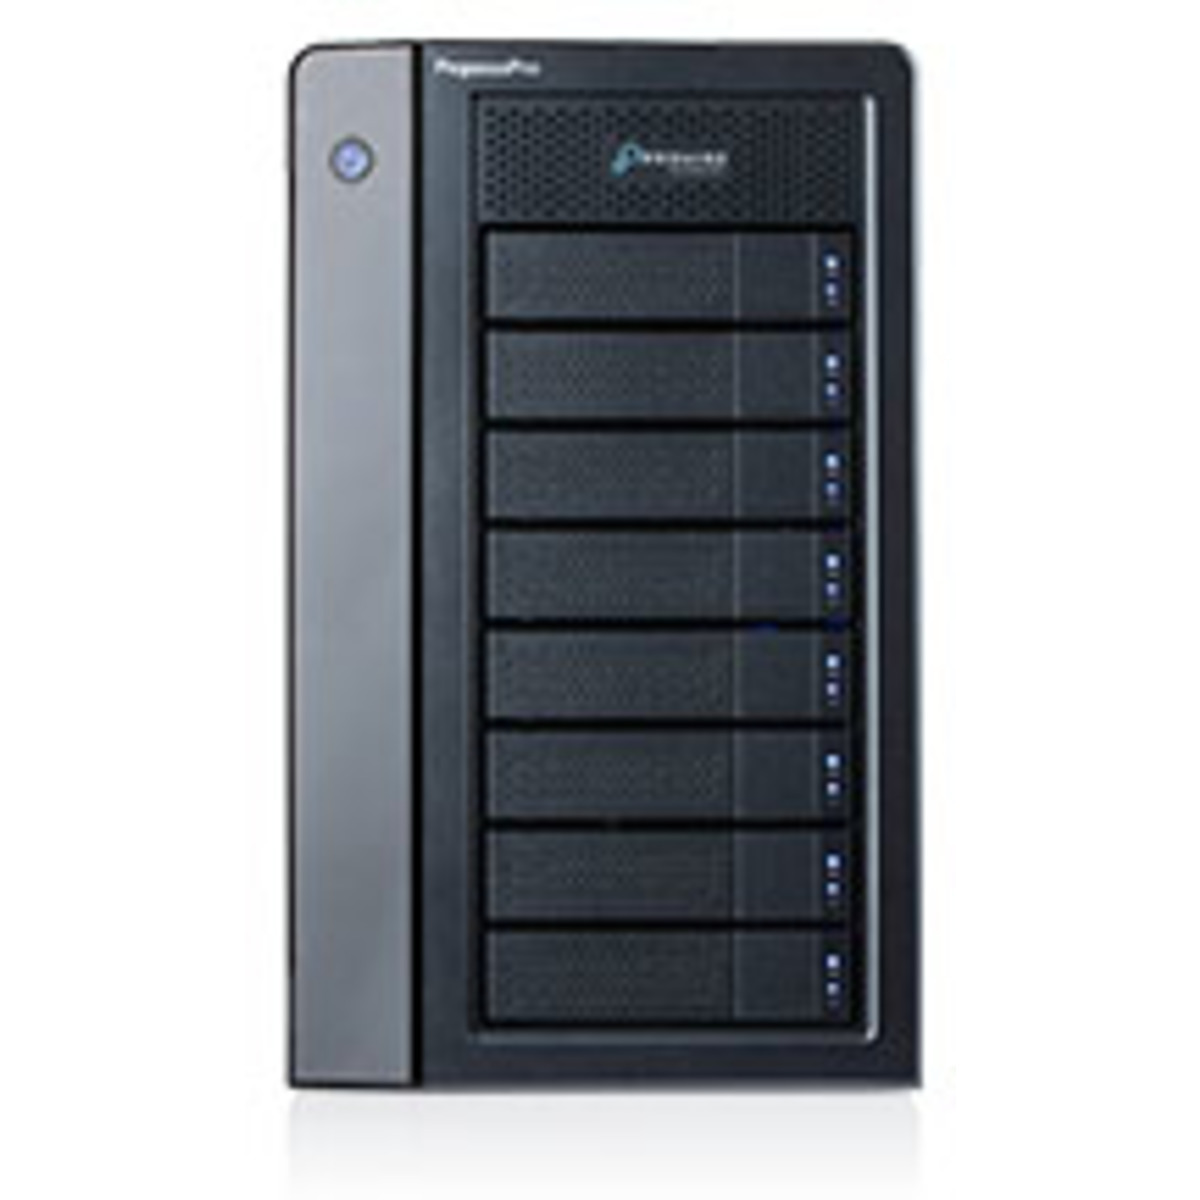 Promise Technology PegasusPro R8 120tb 8-Bay Desktop Multimedia / Power User / Business DAS-NAS - Combo Direct + Network Storage Device 6x20tb Western Digital Ultrastar HC560 WUH722020ALE6L4 3.5 7200rpm SATA 6Gb/s HDD ENTERPRISE Class Drives Installed - Burn-In Tested PegasusPro R8